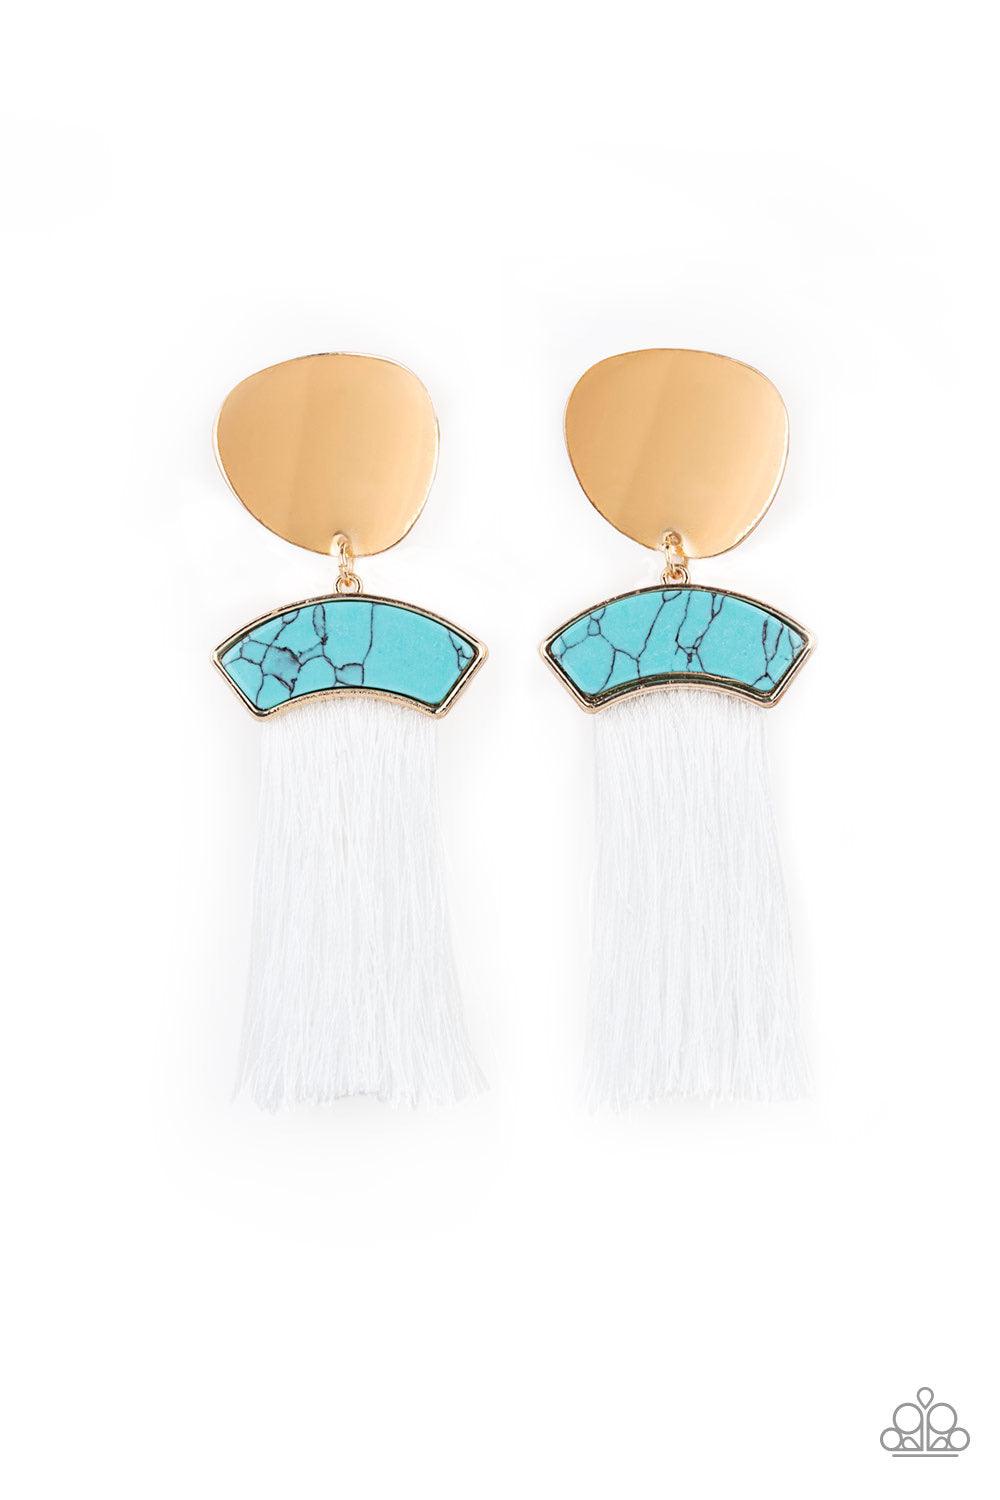 Paparazzi Accessories Insta Inca - Blue A plume of shiny white thread streams from the bottom of a turquoise stone frame that links with an asymmetrical gold disc, creating a flirtatious tassel. Earring attaches to a standard post fitting. Jewelry